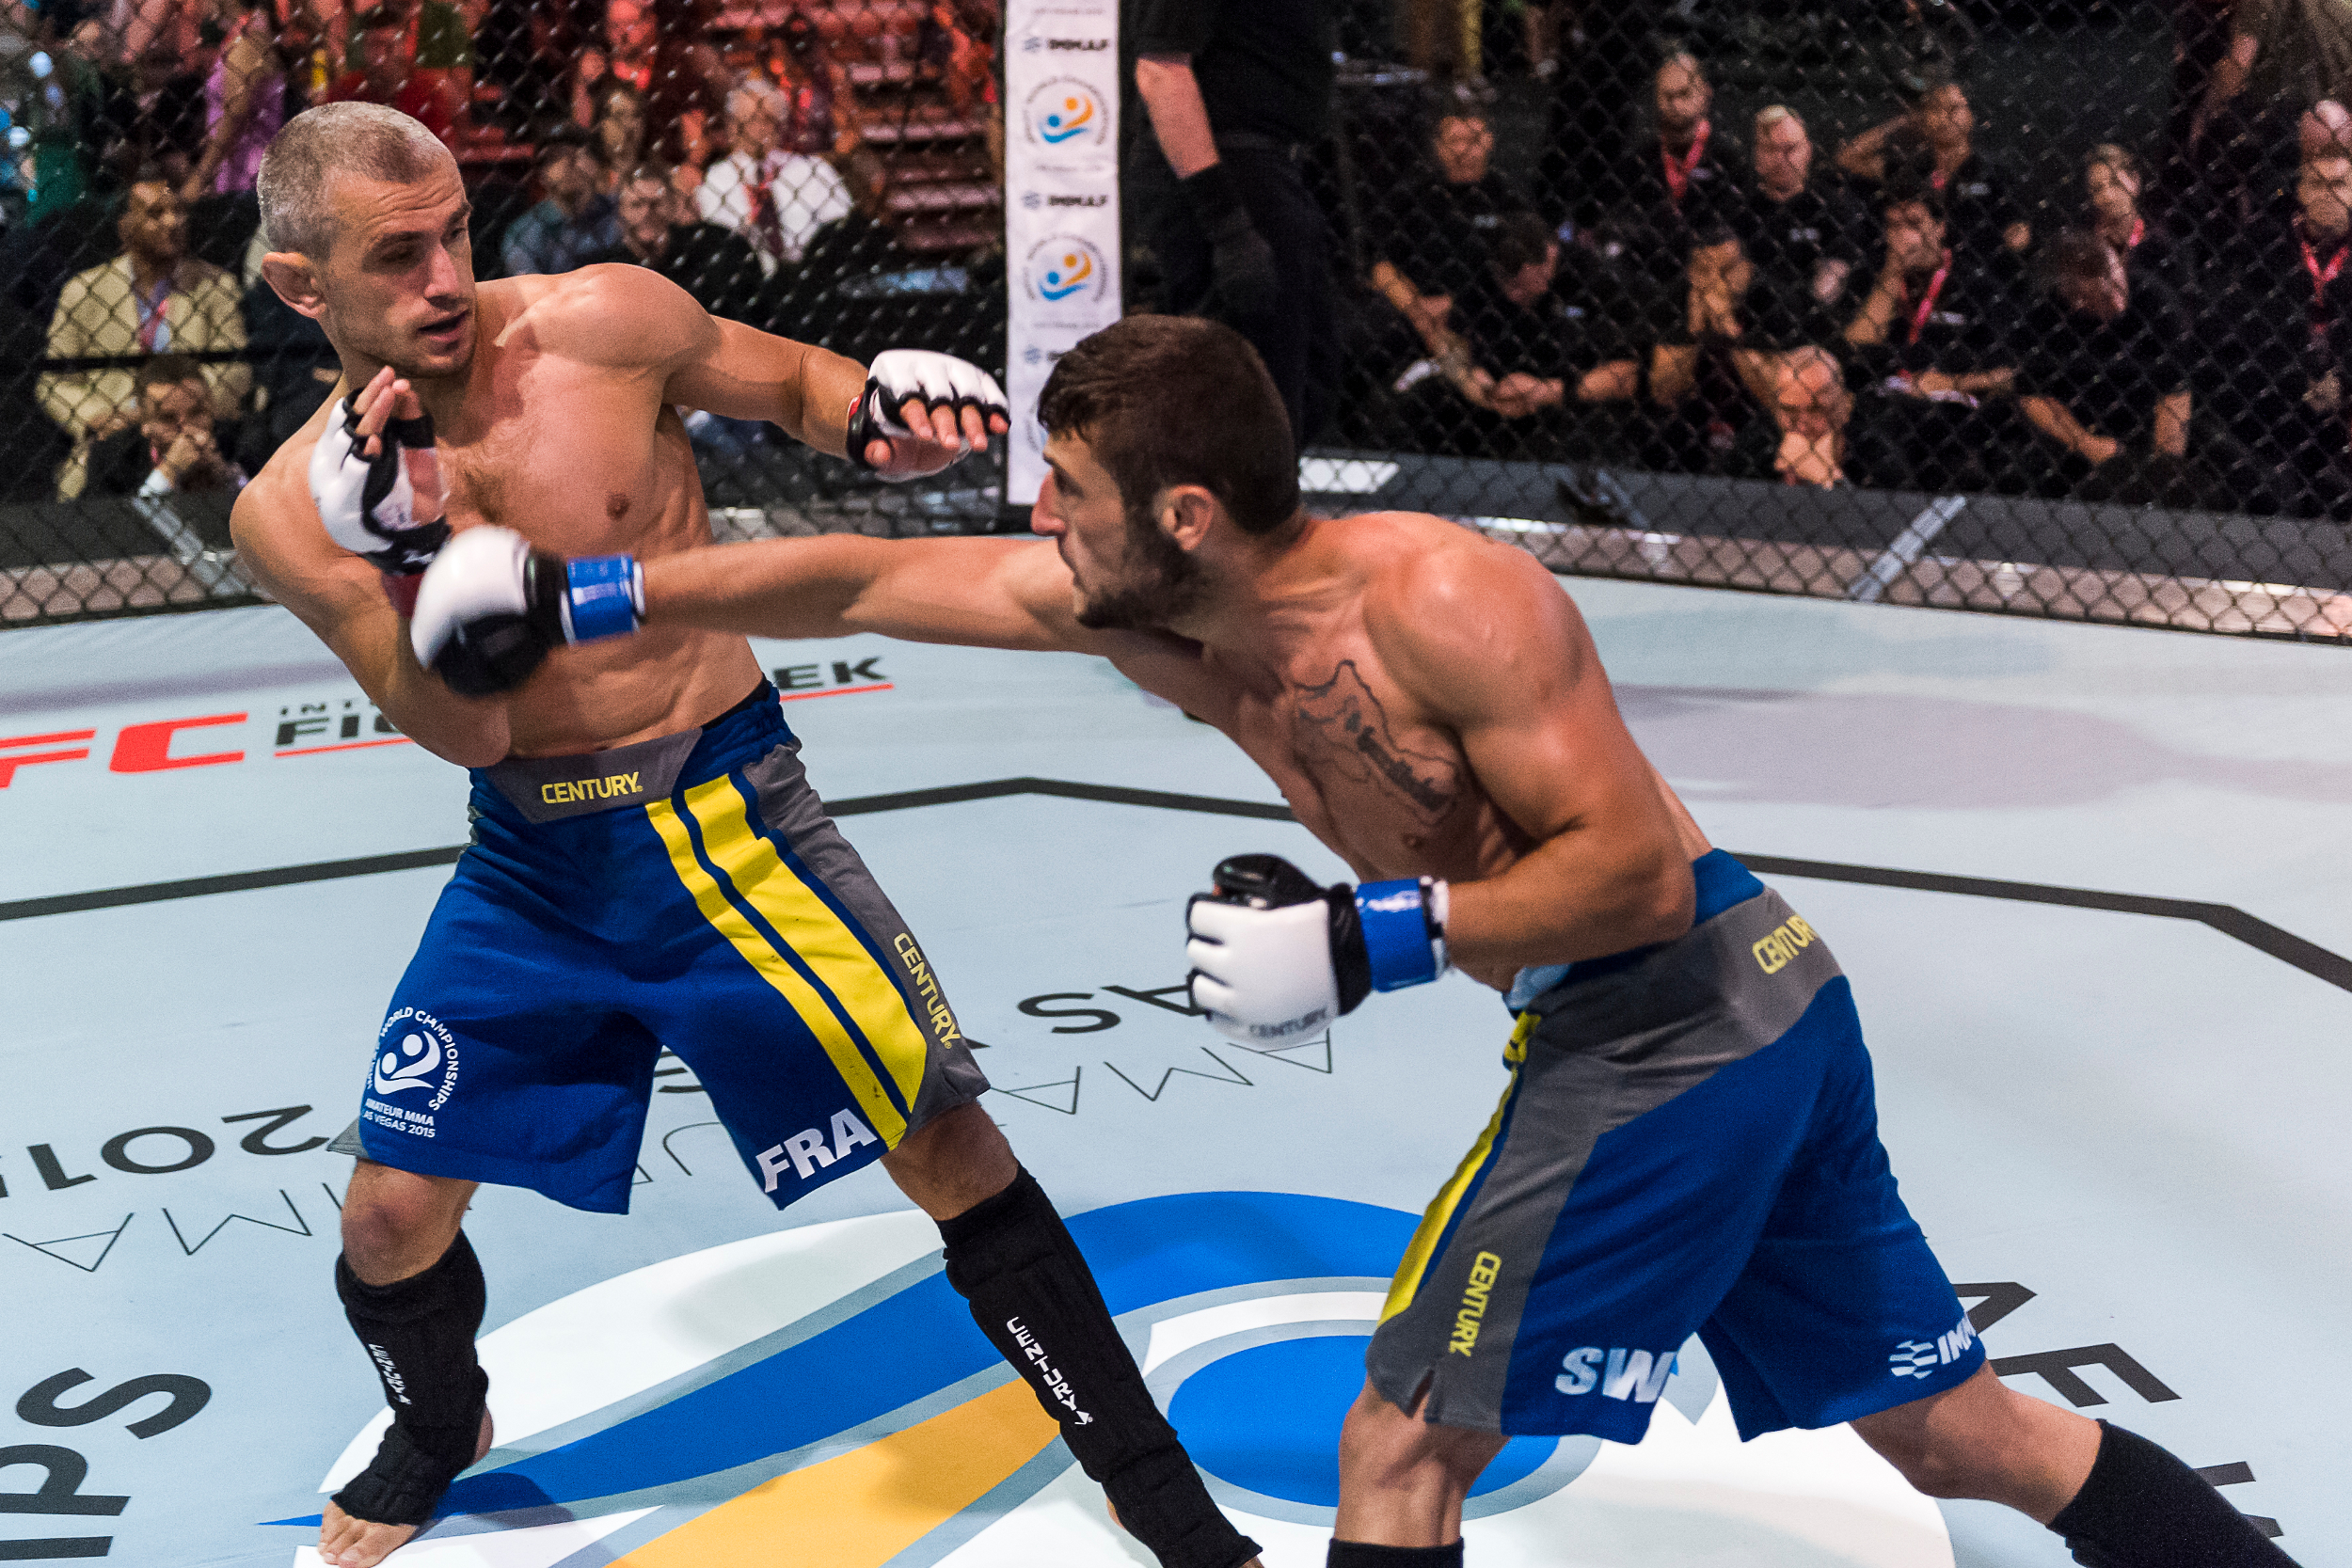  Broadreach Media brought broadcast of International MMA Federation’s World and Continental MMA Championships to over 130 countries in a six-figure deal. 